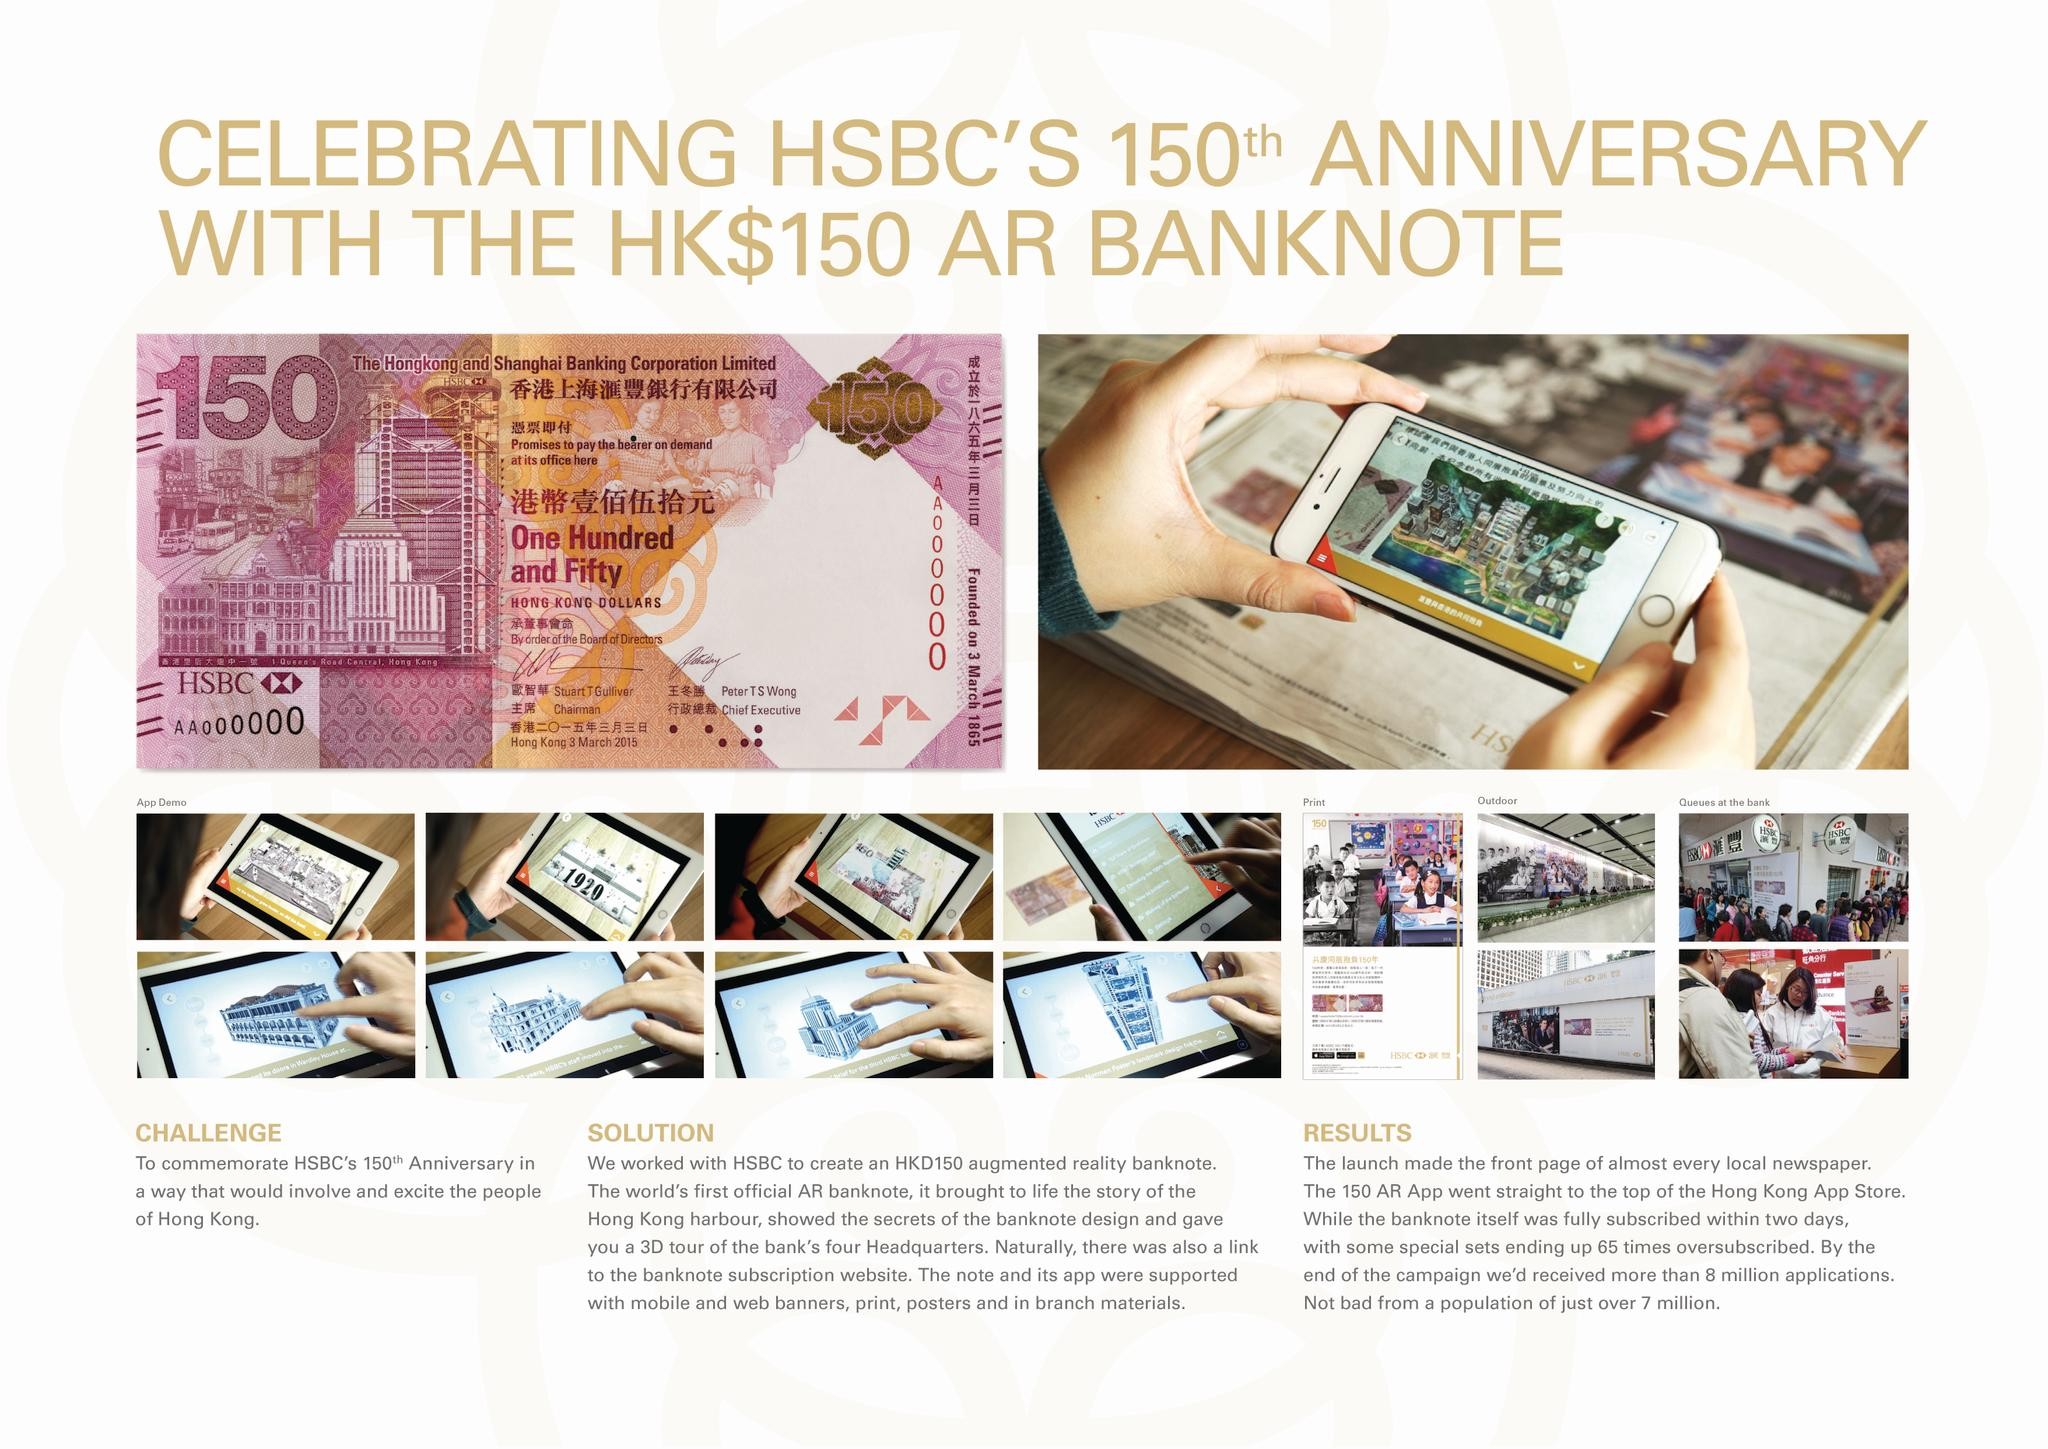 THE HSBC $150 AR BANKNOTE